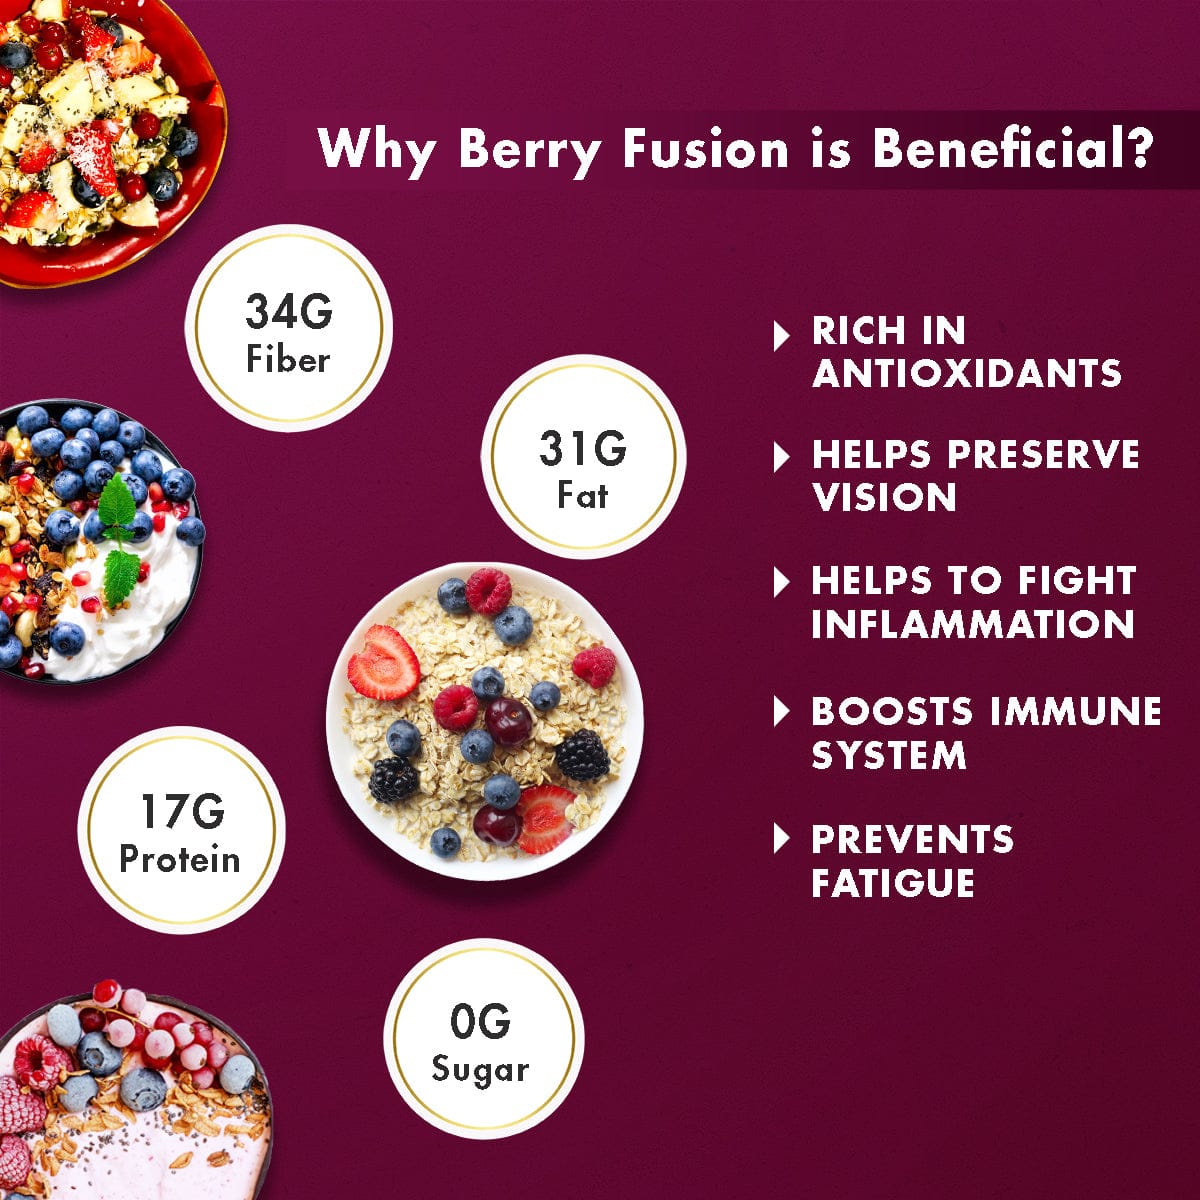 blueberry and cranberry health benefits